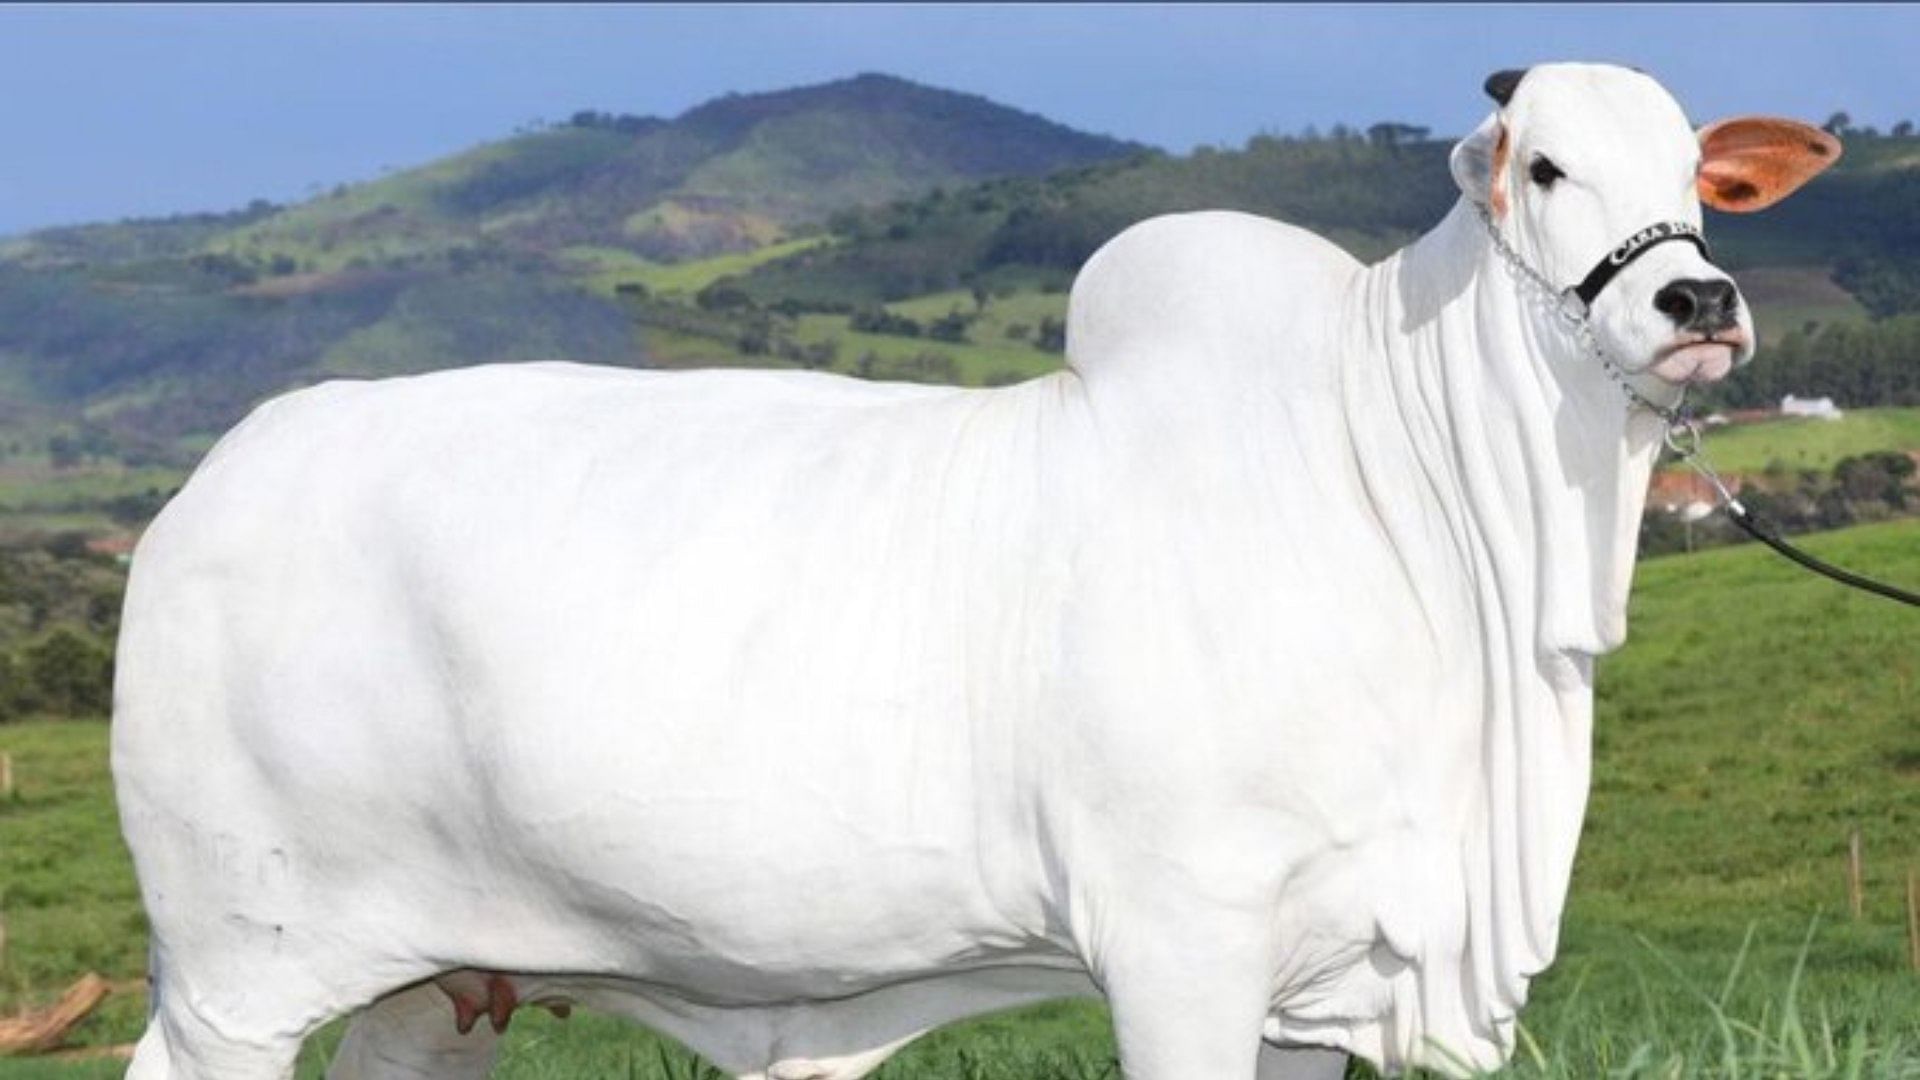 The world's most expensive cow was sold in Brazil for around $4.8 million